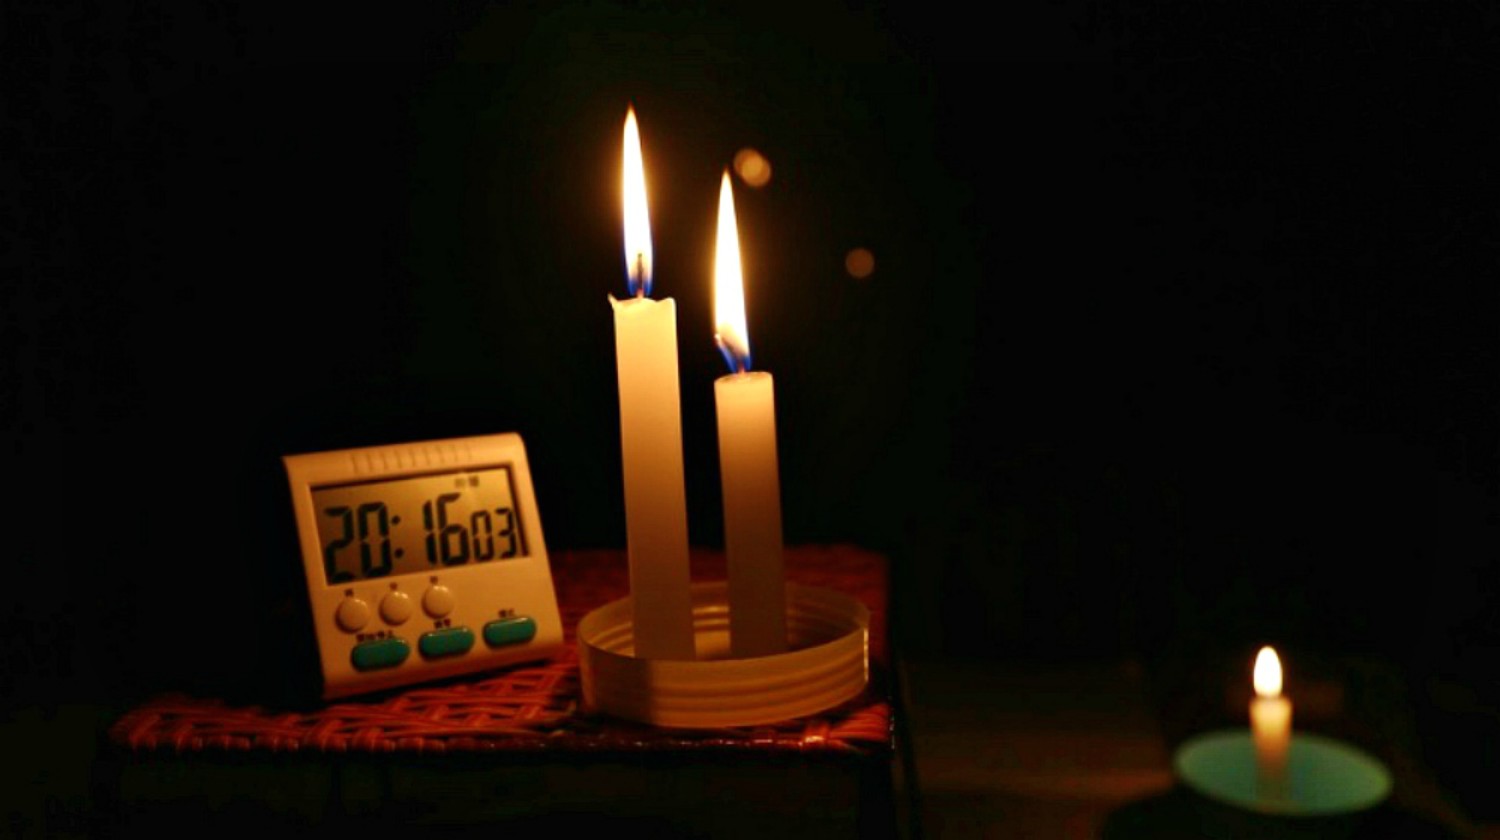 Feature | Burning Candle beside clock in the table | Power Outage: What To Do When The Power Goes Out